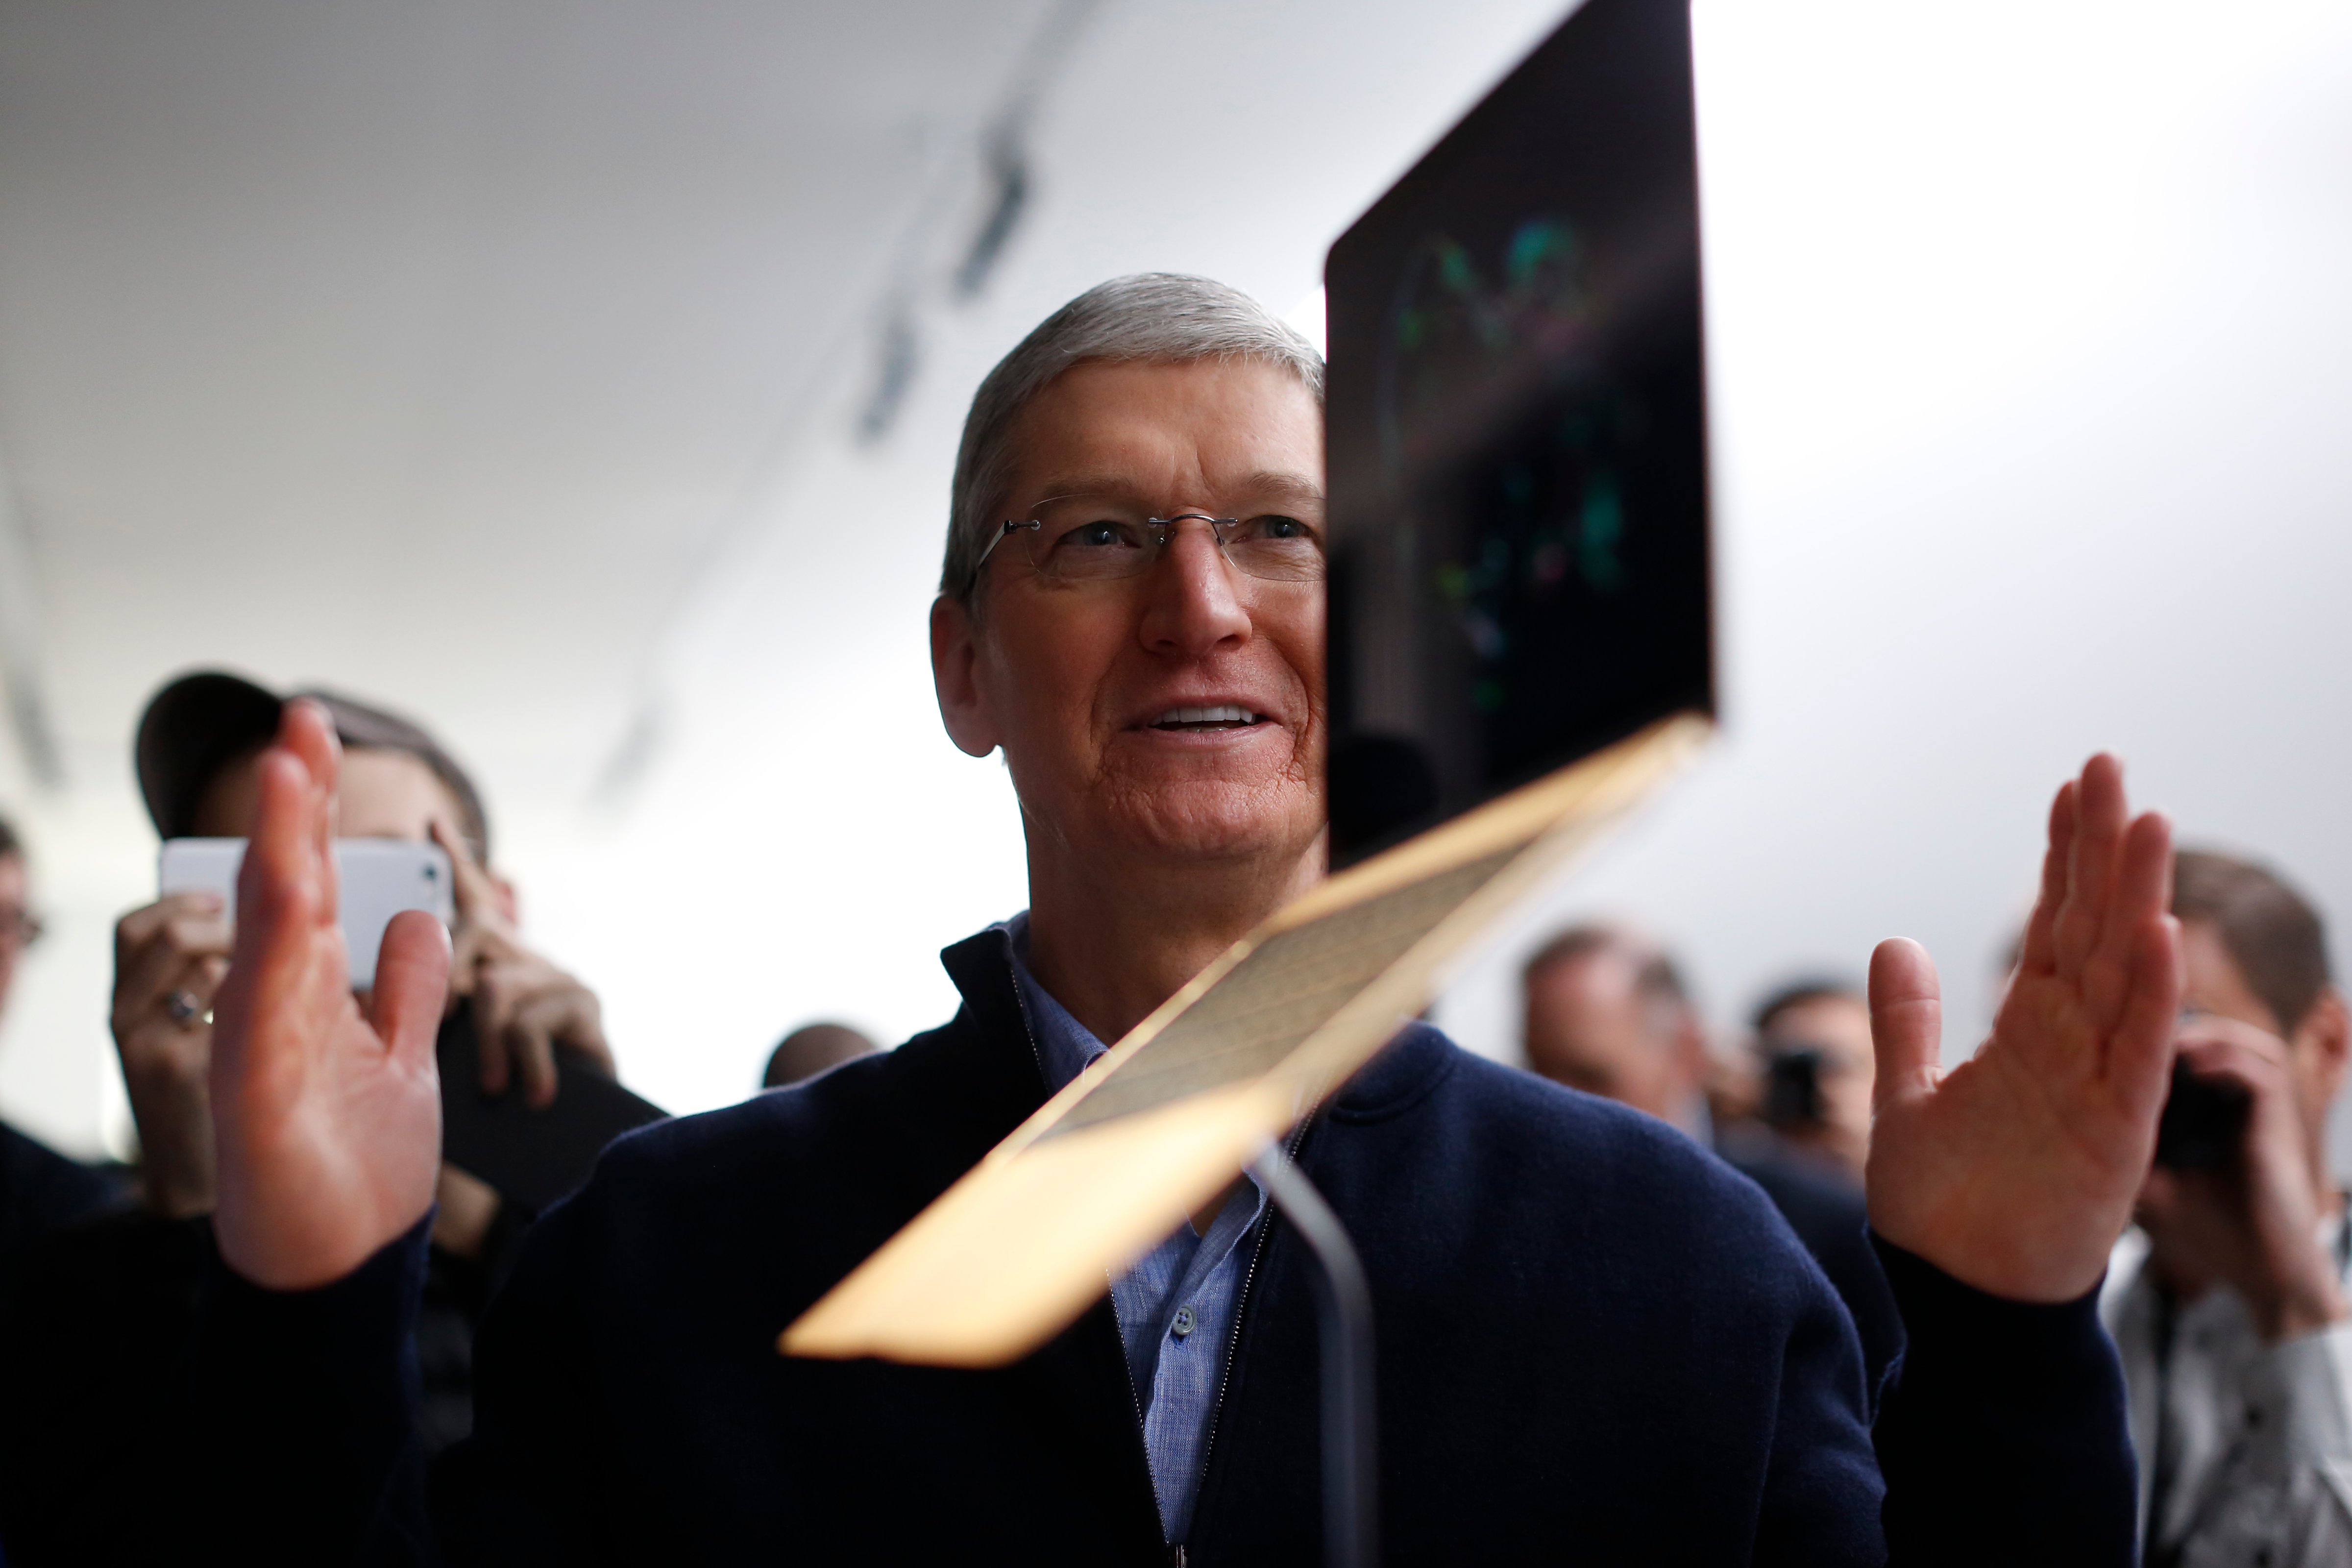 Apple CEO Tim Cook stands in front of an MacBook on display after an Apple special event at the Yerba Buena Center for the Arts on March 9, 2015 in San Francisco, California. (Stephen Lam&mdash;Getty Images)